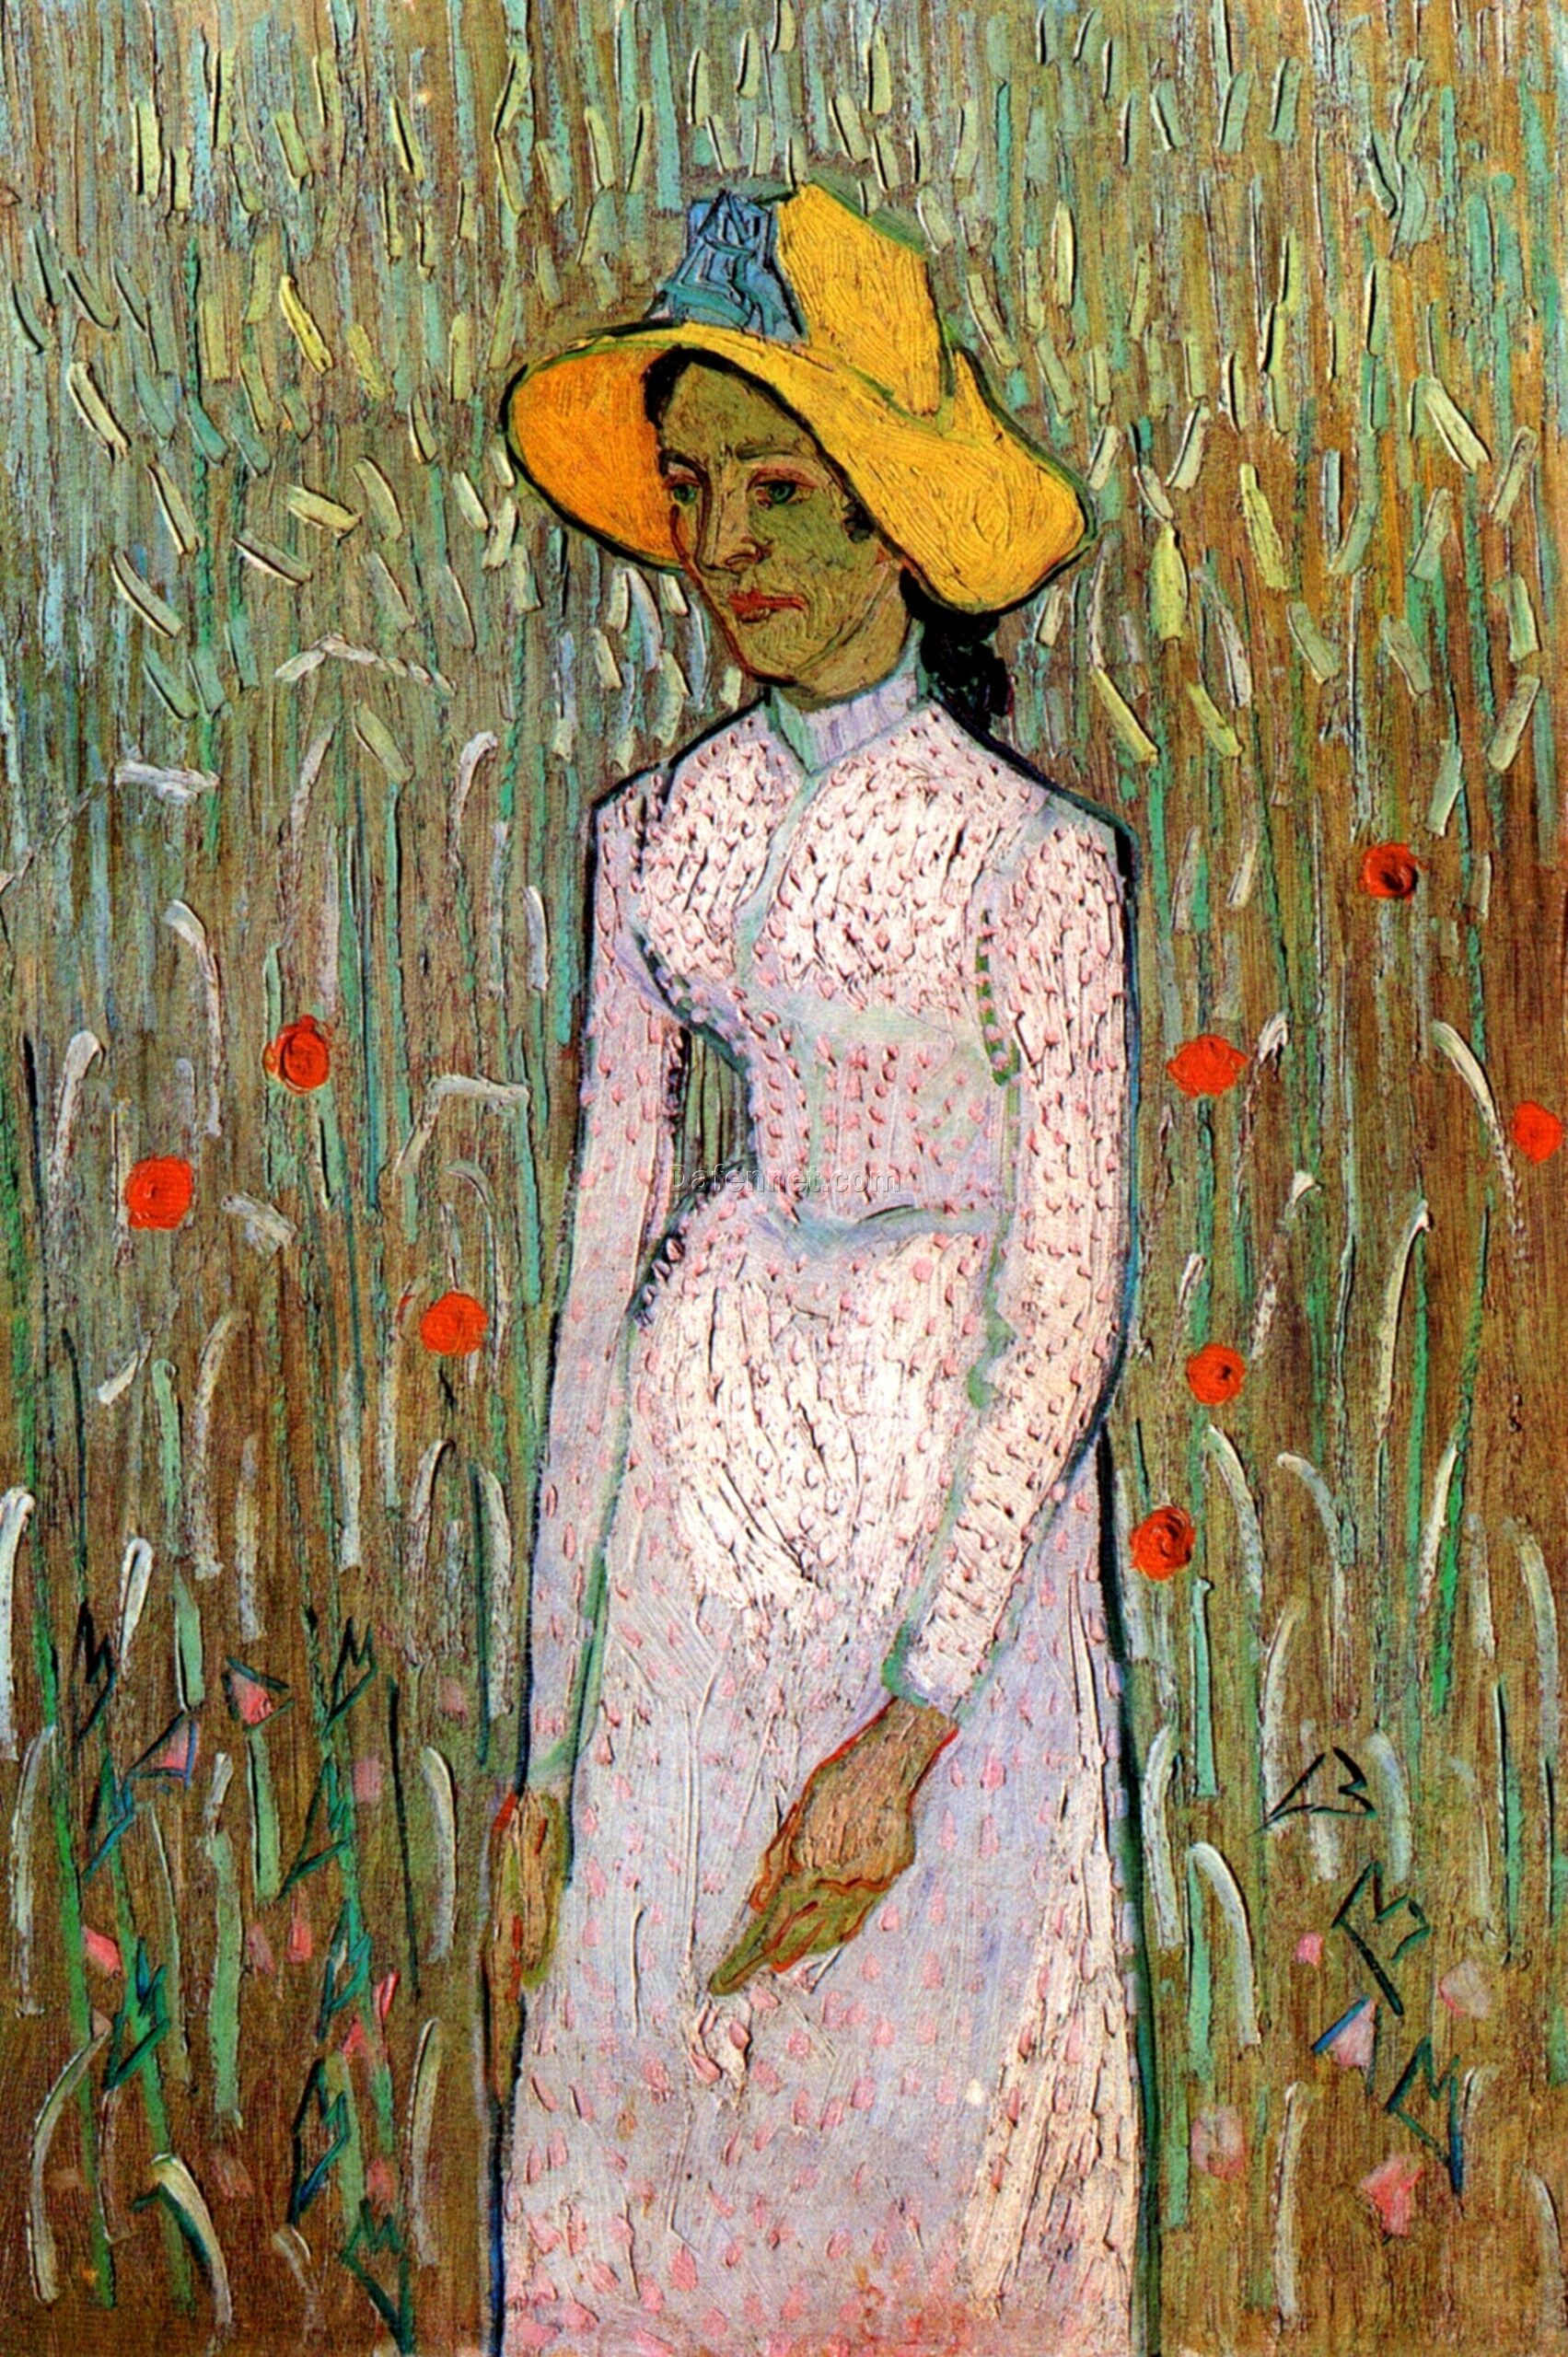 Young Girl Standing Against a Background of Wheat- Vincent van Gogh-oil painting reproduction